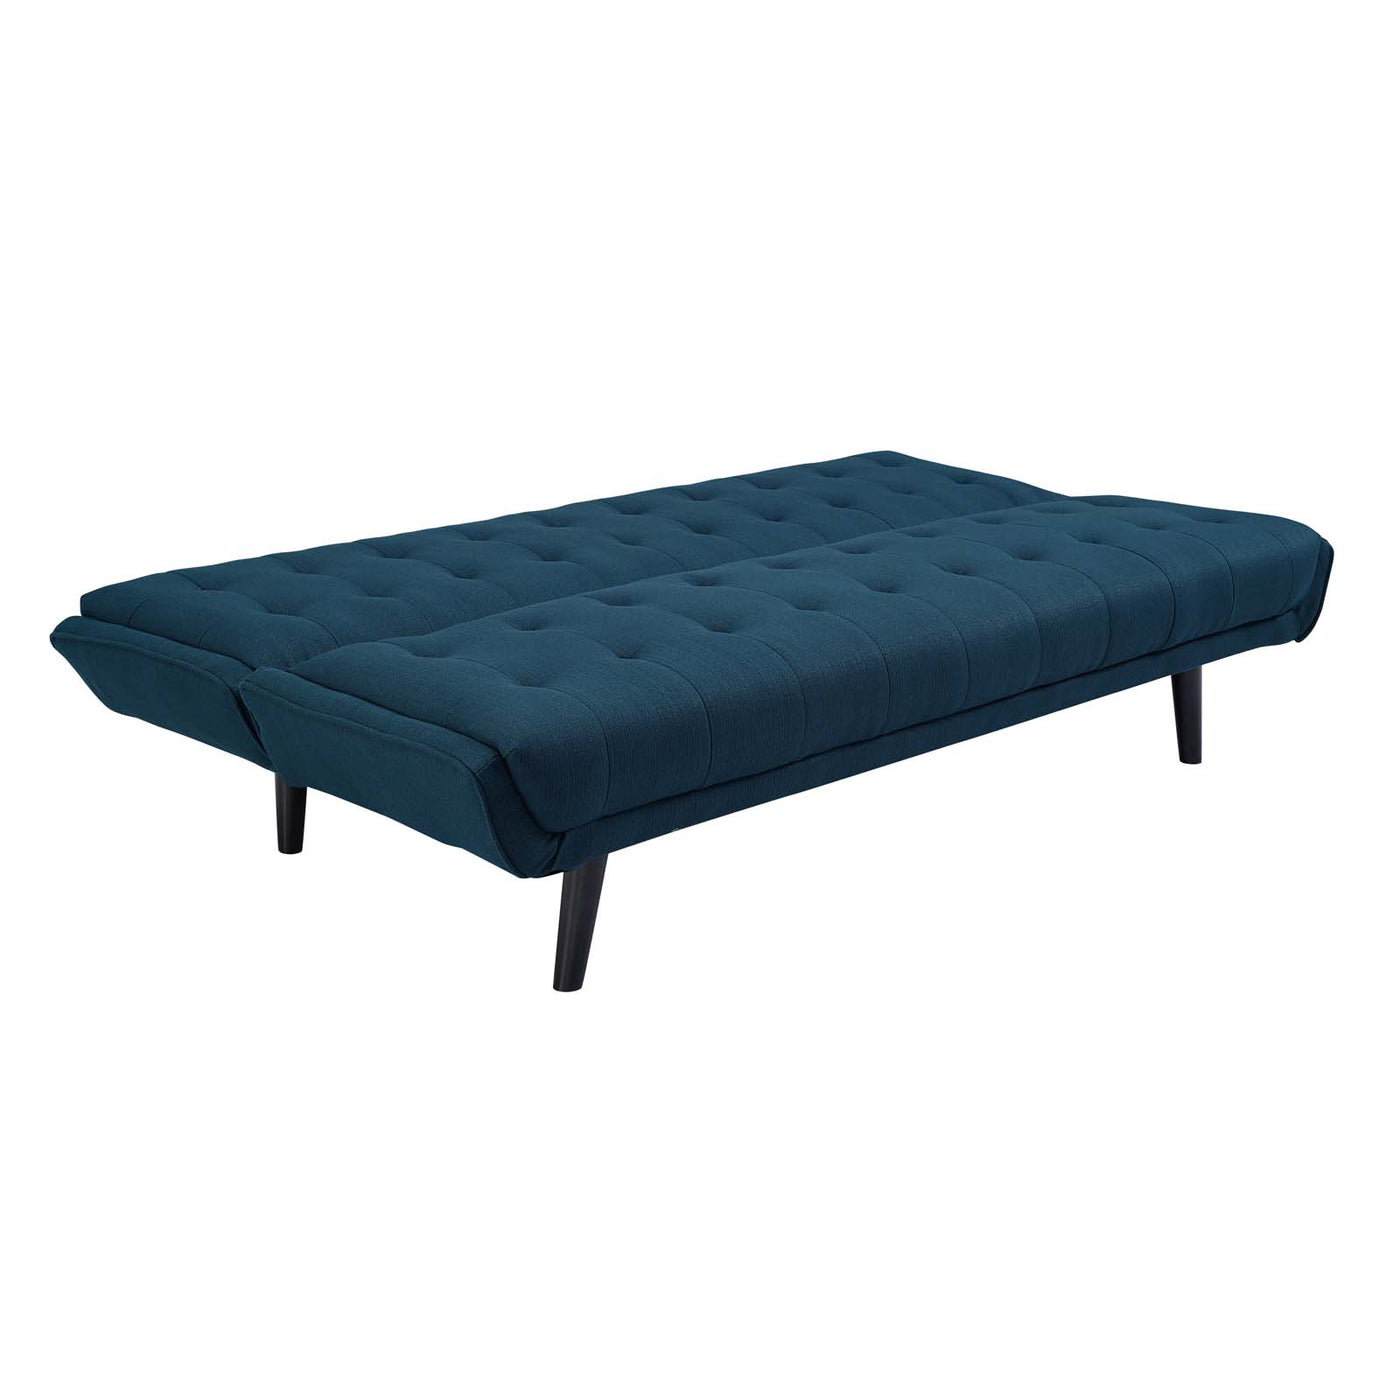 Glance Tufted Convertible Fabric Sofa Bed